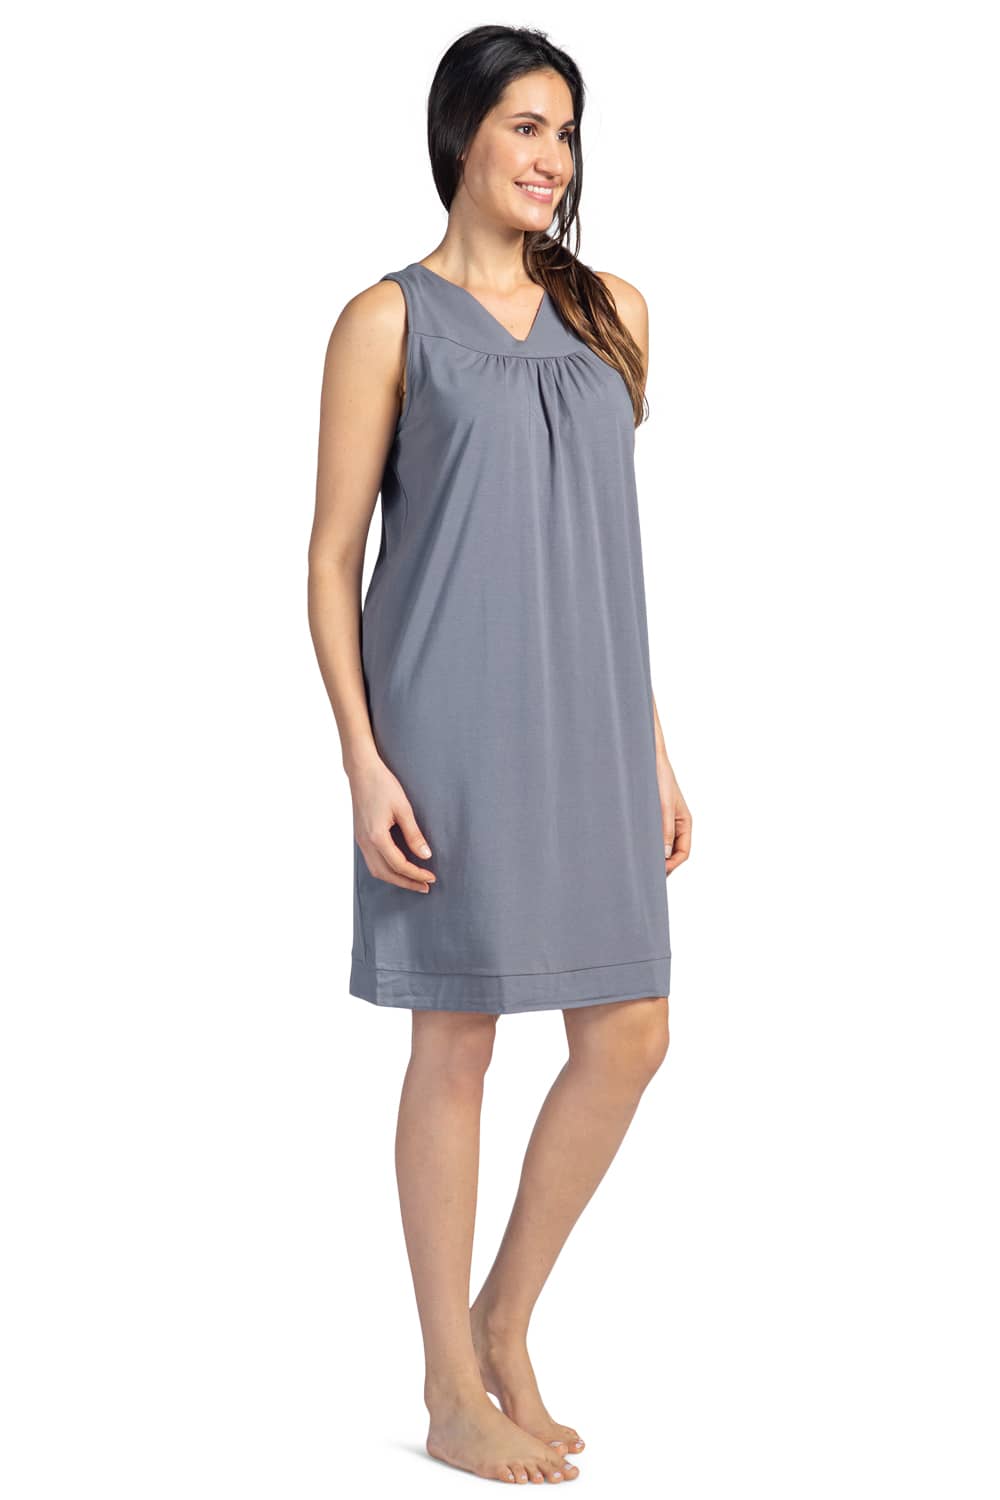 Sleeveless Womens Nightgown, Nightgowns for Women